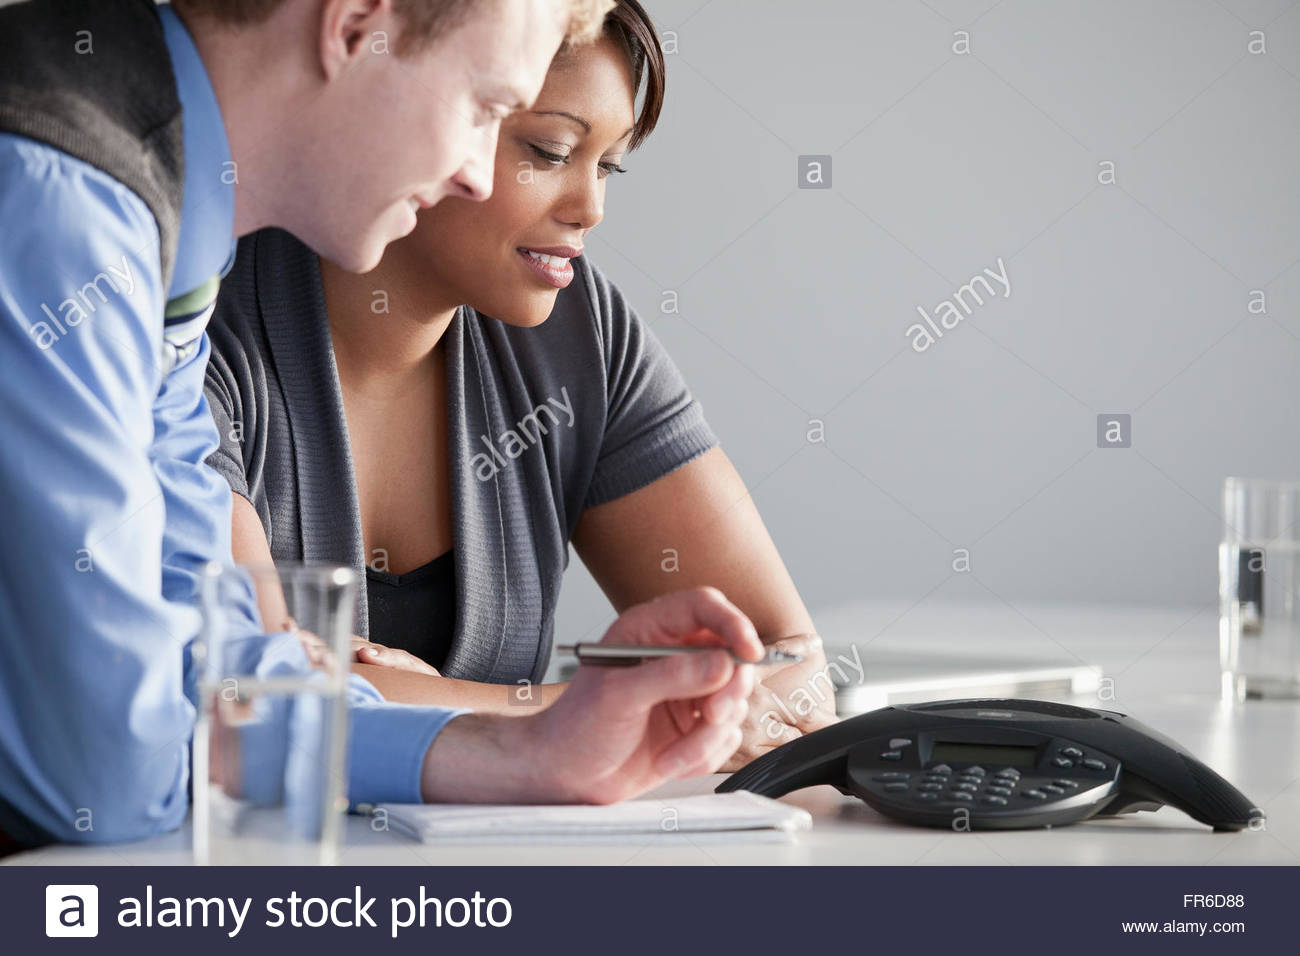 coworkers in discussion Stock Photo